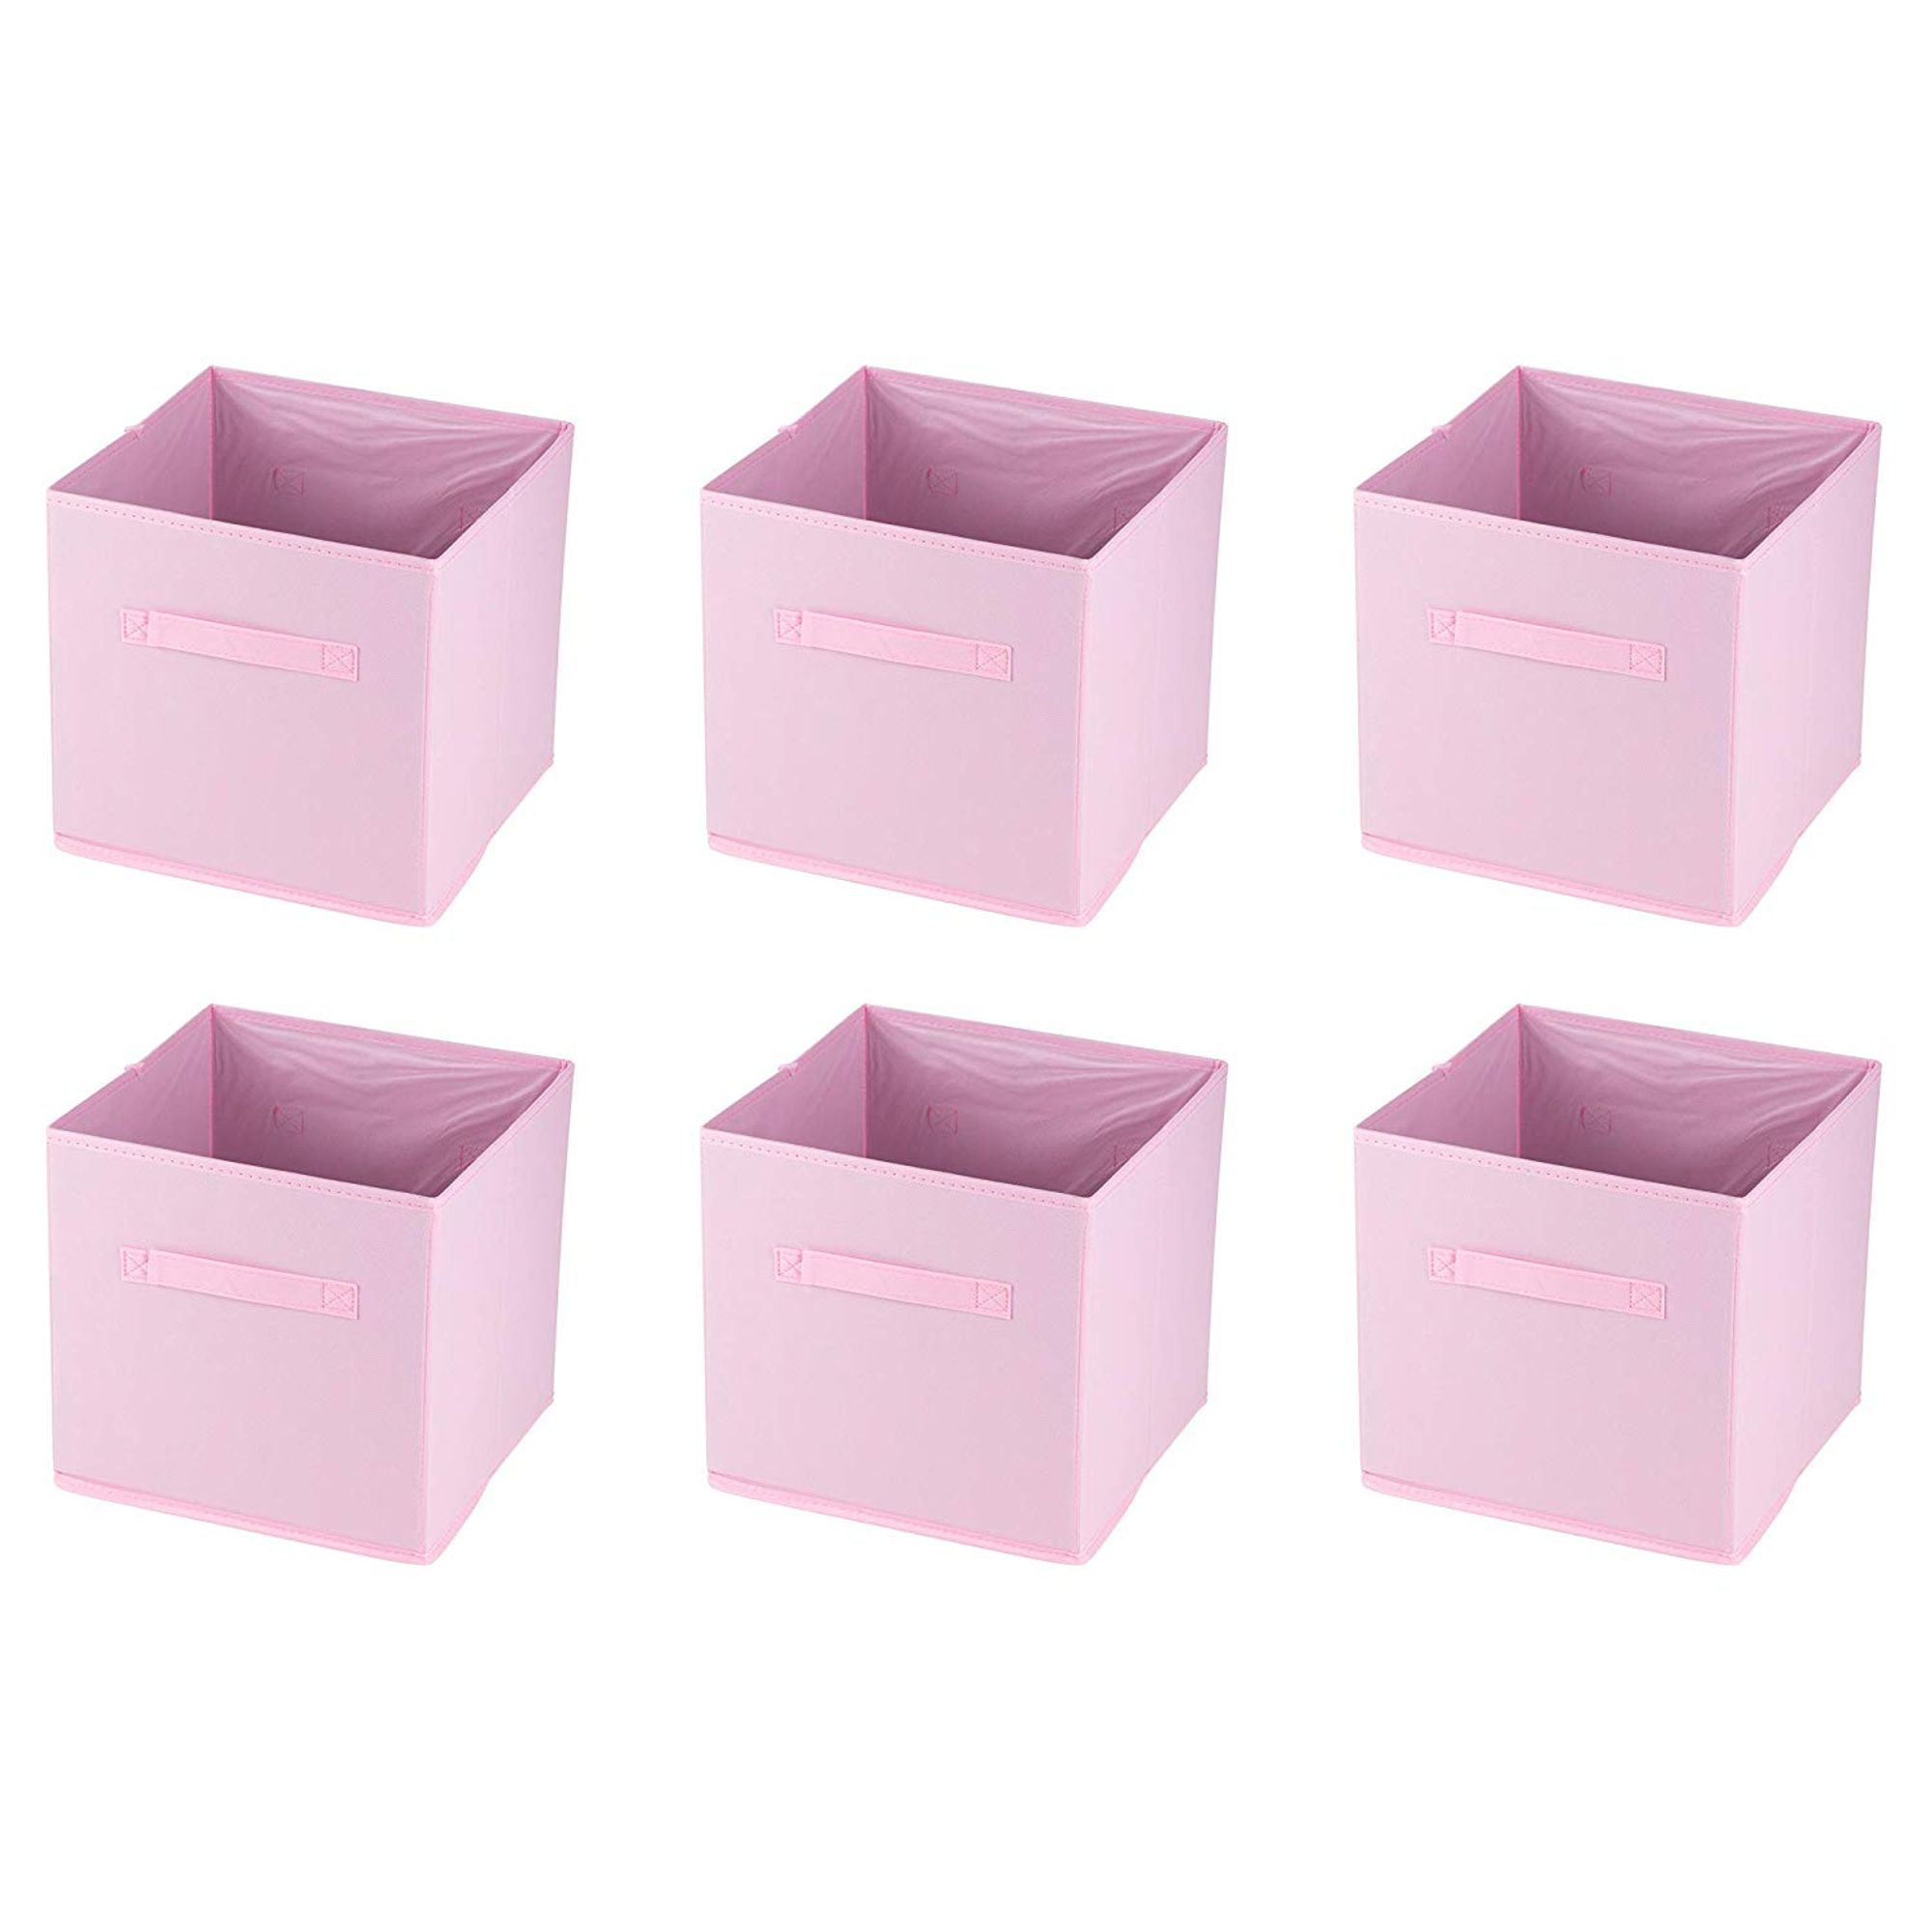 Cube Storage Bins Features 2 Handles and Label Window 13x13x13 Large Storage Cubes Office Fabric Storage Box for Home Beige Set of 6 Storage Bins Foldable Closet Organizers and Storage